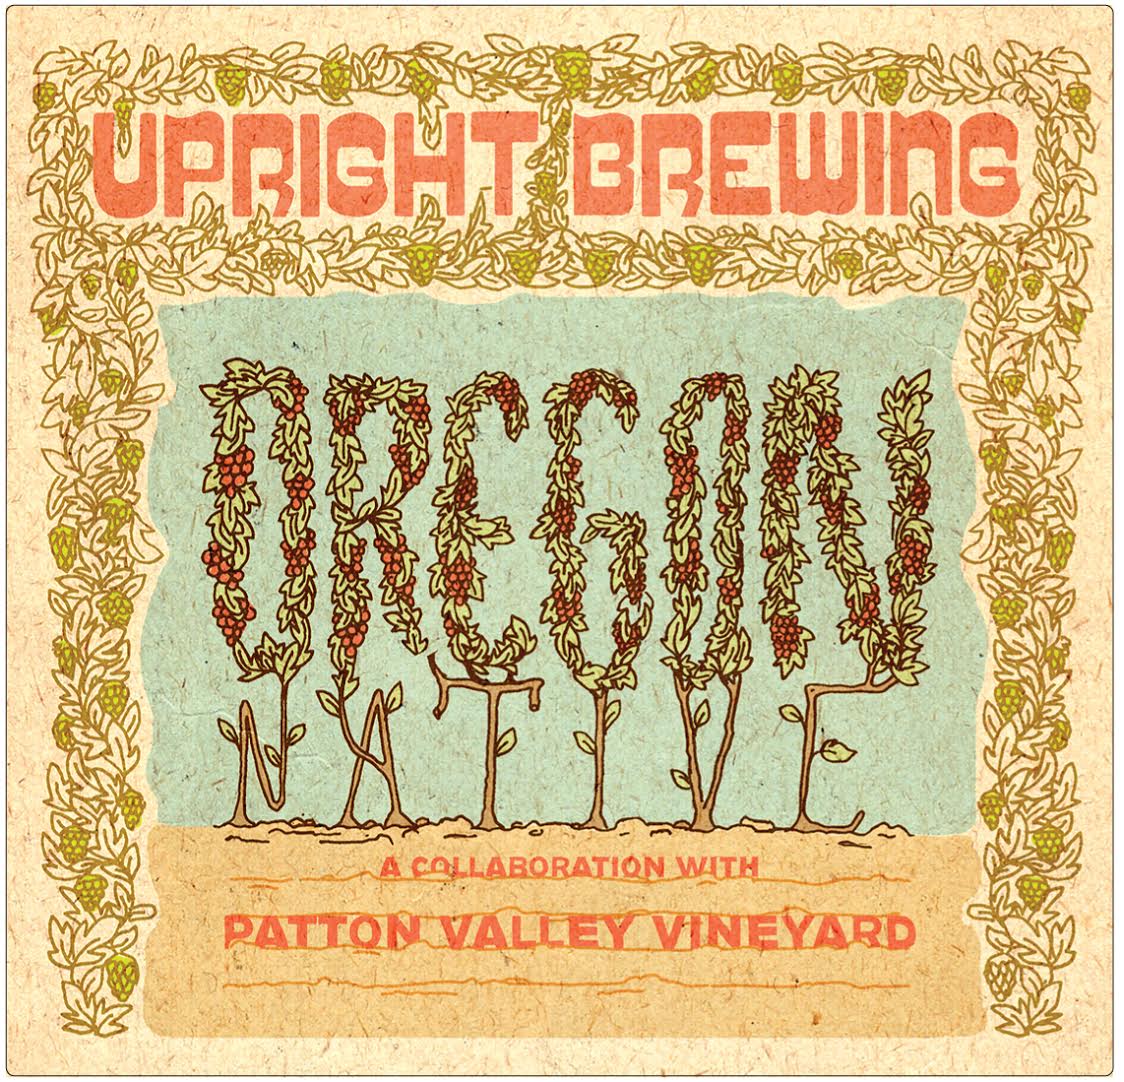 Upright Brewing Oregon Native - A Collaboration With Patton Valley Vineyard (image courtesy of Upright Brewing)